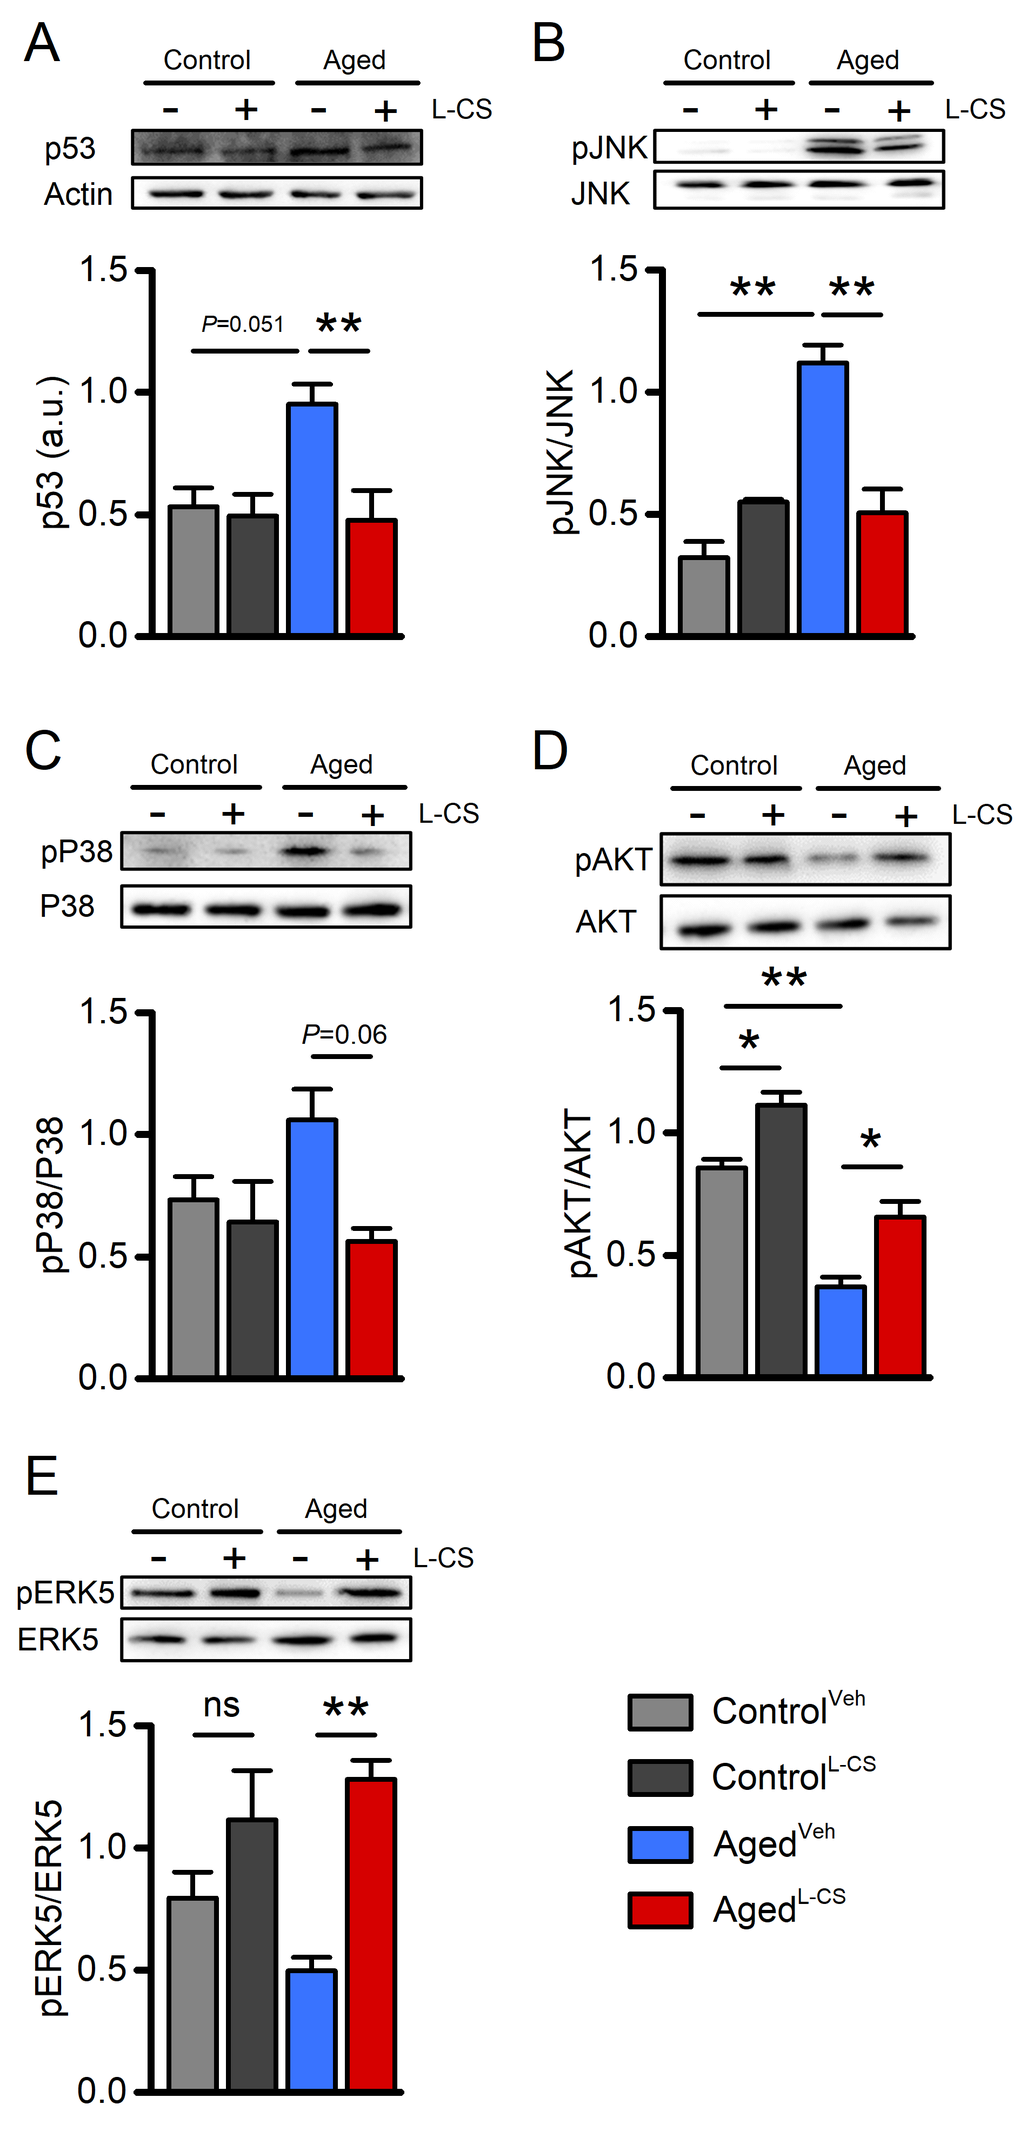 Effects of aging and L-CS on senescence-related molecular markers.Western blots show L-CS-or vehicle-driven effects on senescence-associated markers obtained from protein extracts of control and aged cortical cultures. Each image is representative of three independent experiments. (A) Bar graphs depict p53 levels in the four study groups (n=3). (B) Bar graphs depict pJNK levels in the four study groups (n=3). (C) Bar graphs depict pP38 levels in the four study groups (n=3). (D) Bar graphs depict pAKT levels in the four study groups (n=3). (E) Bar graphs depict pERK5 levels in the four study groups (n=3). Means were compared by two-way ANOVA followed by Tukey post-hoc test. * indicates p